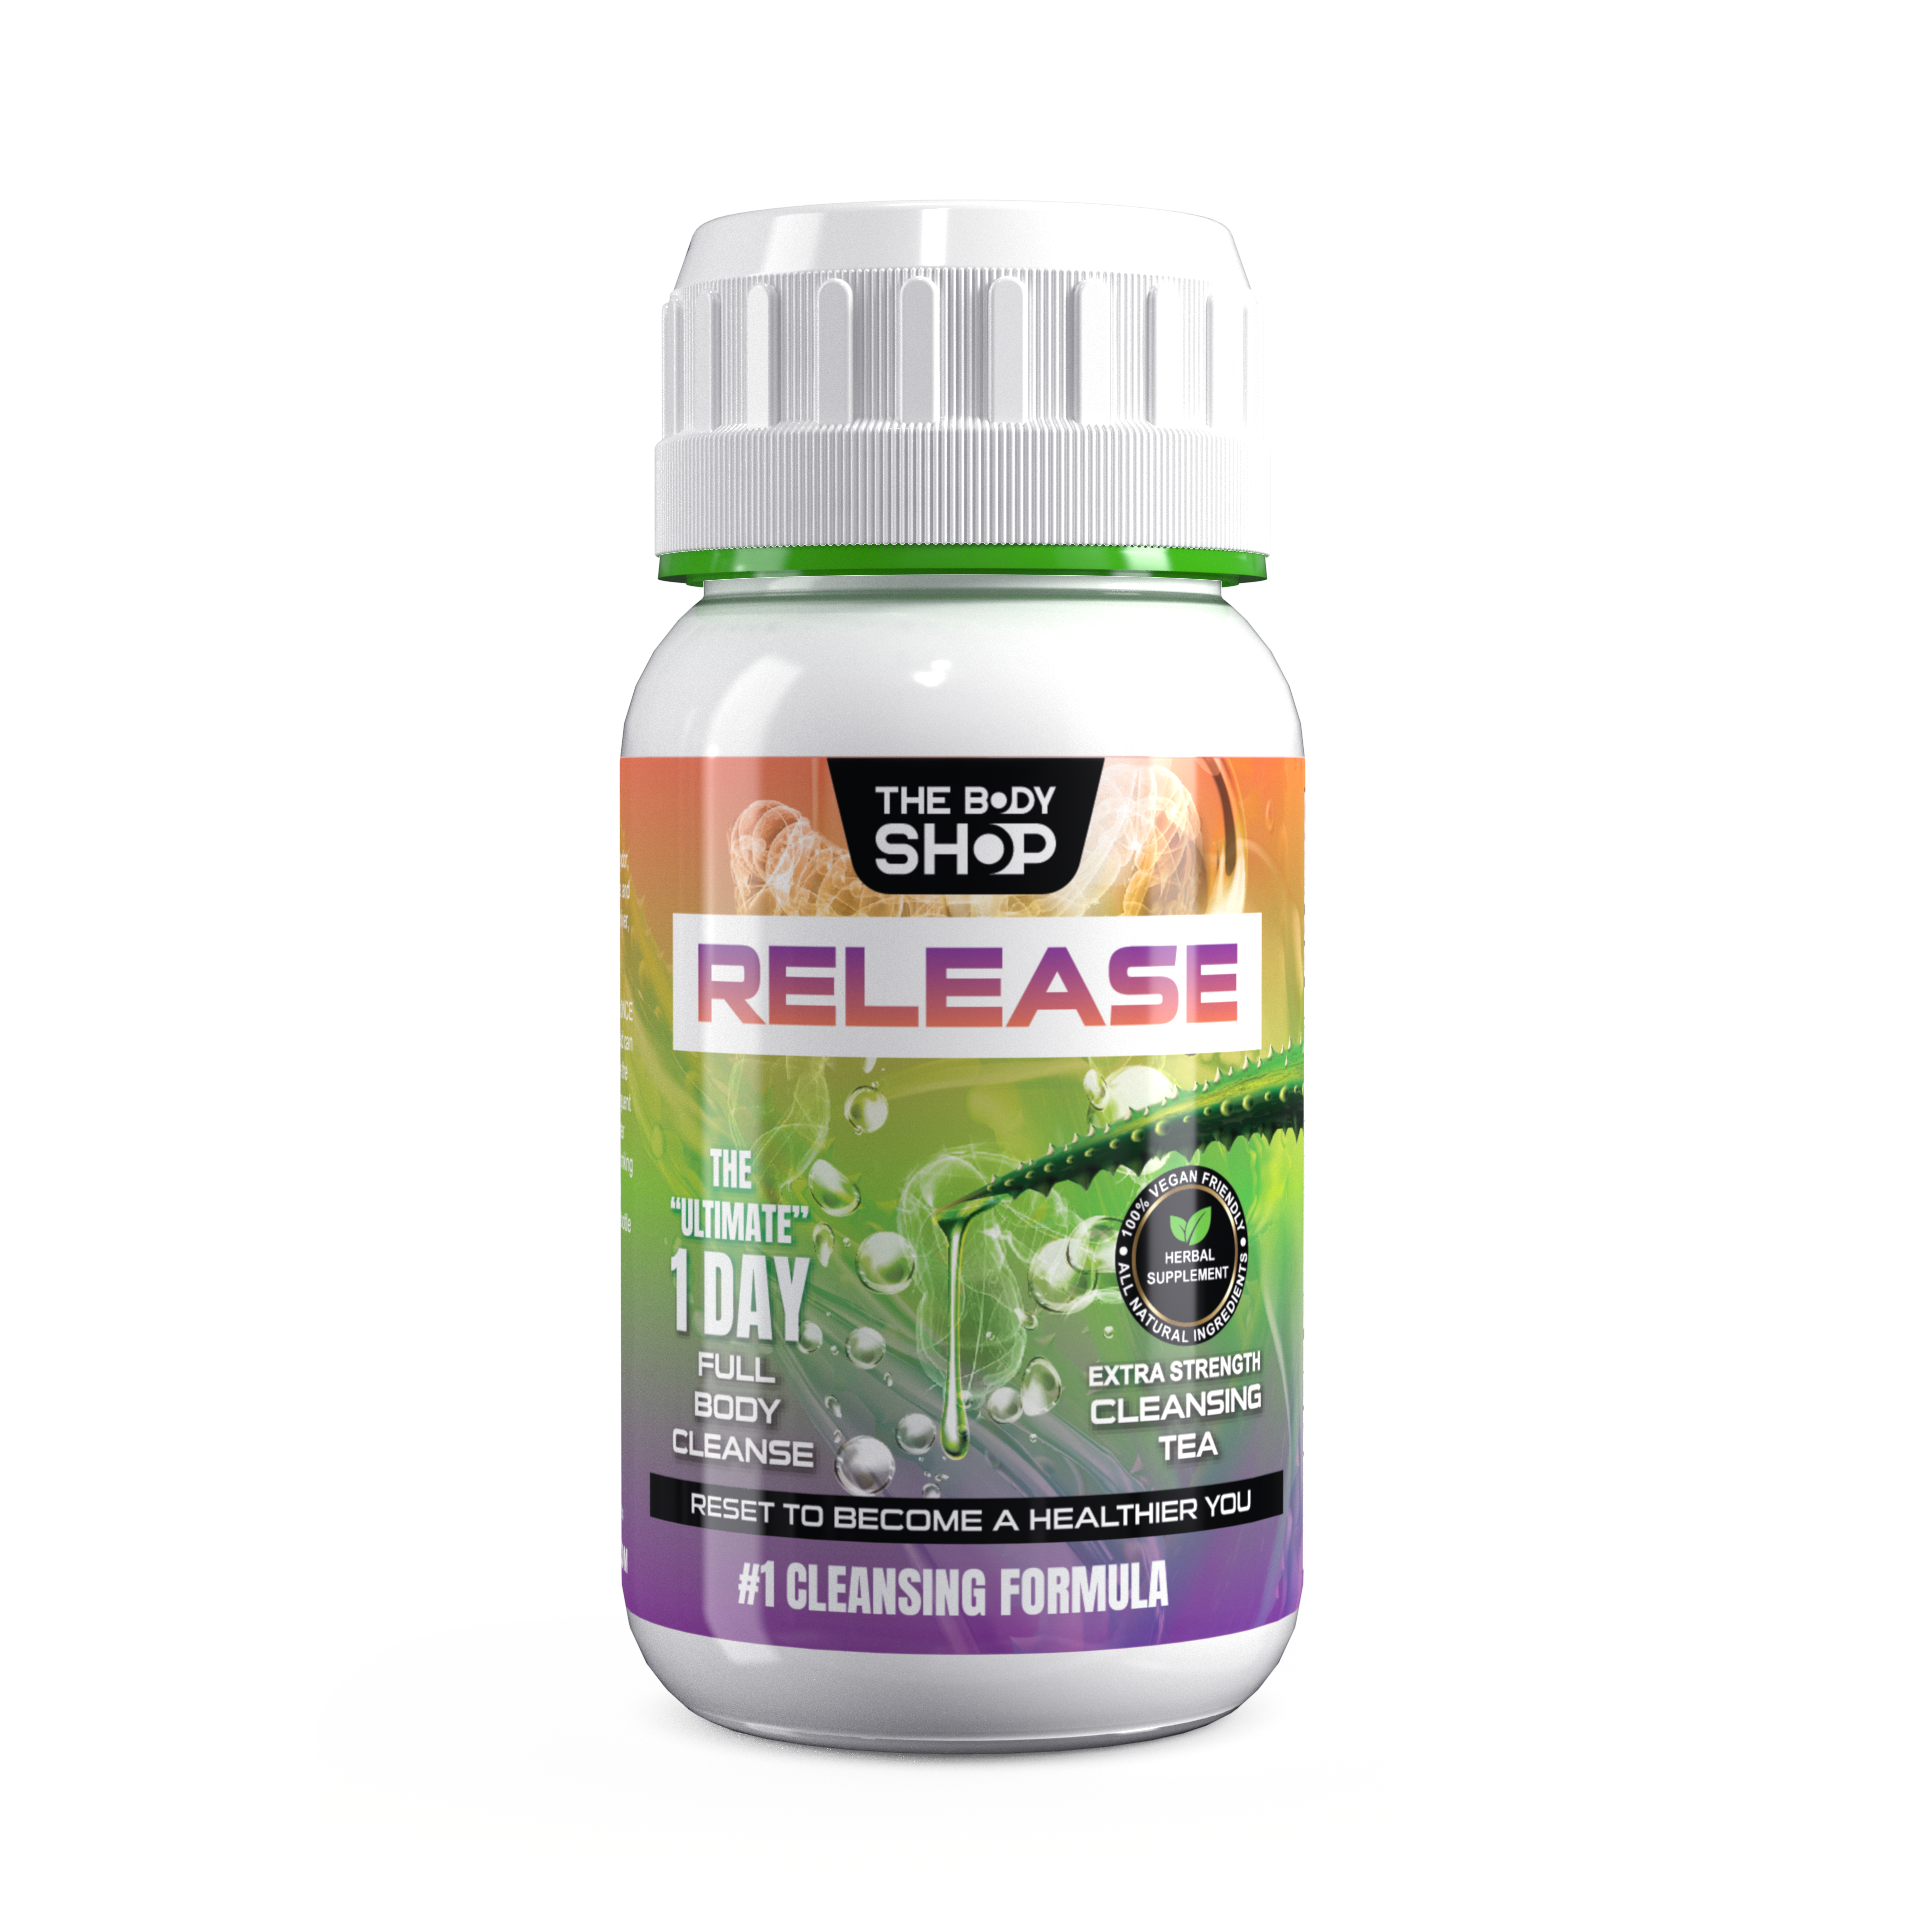 TRY ME DEAL! Release ONE DAY Full Cleanse